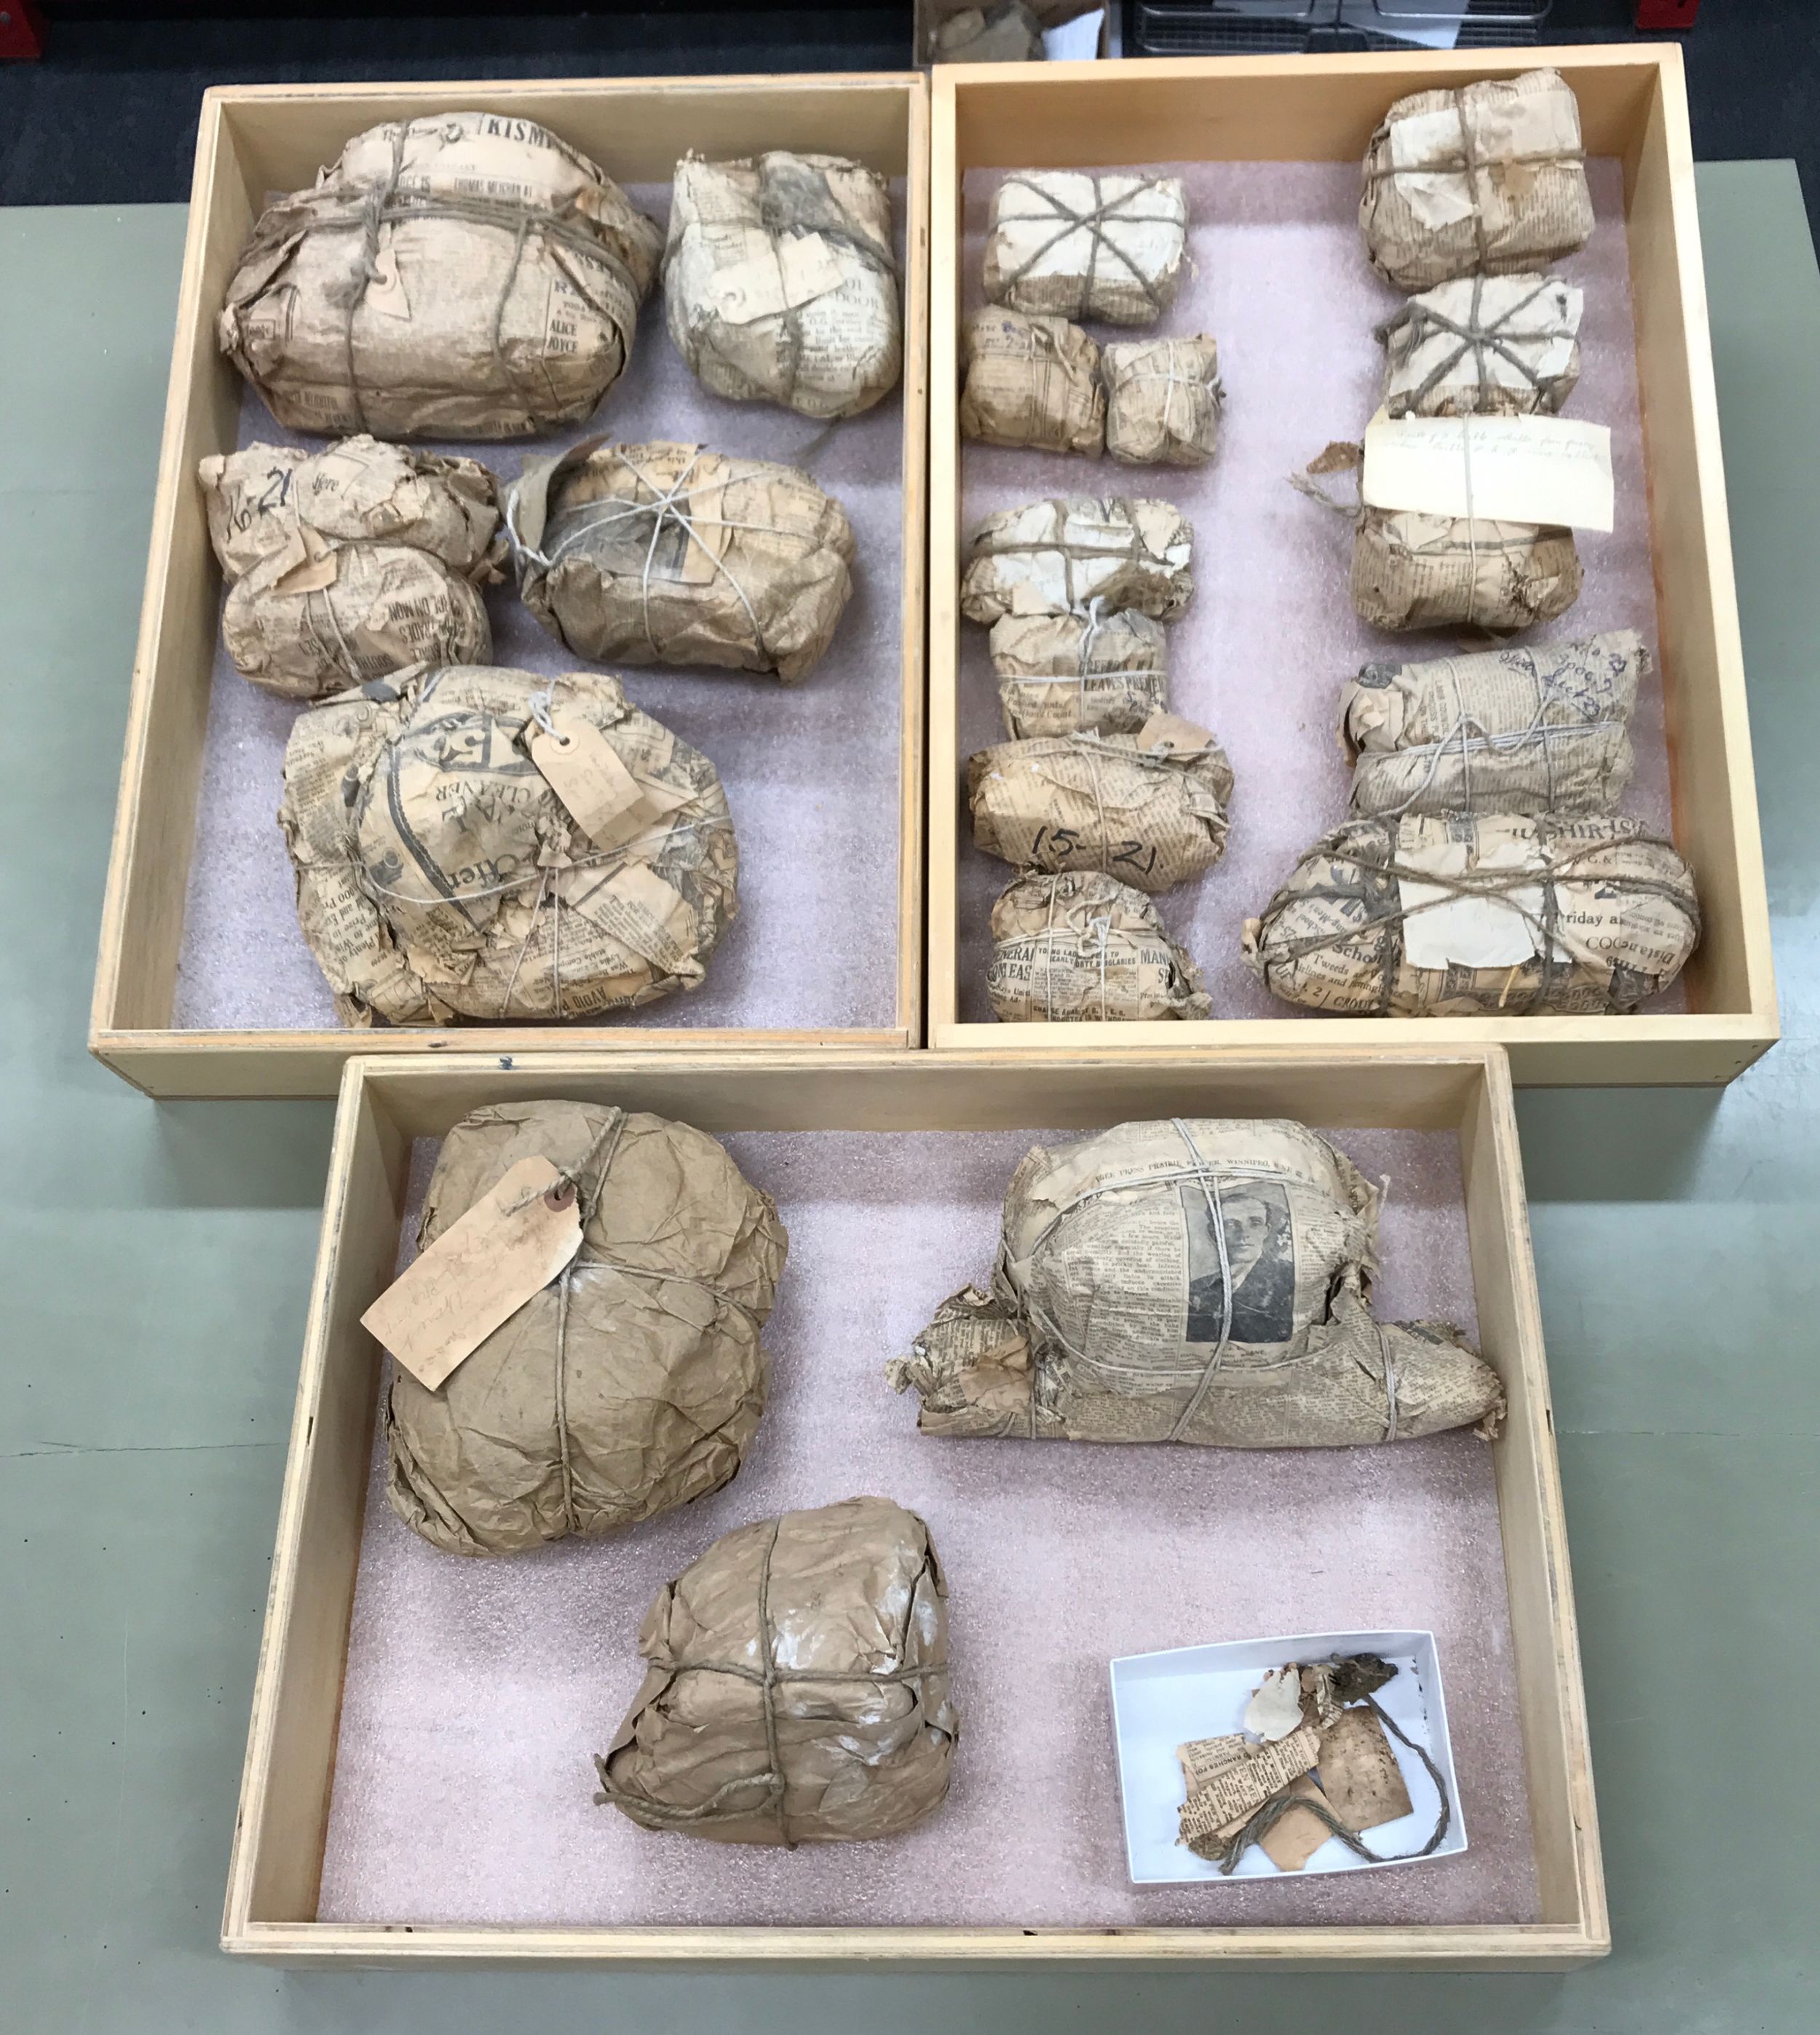 Three wooden boxes containing dinosaur bones wrapped in old newspaper (Photo courtesy Clive Coy)